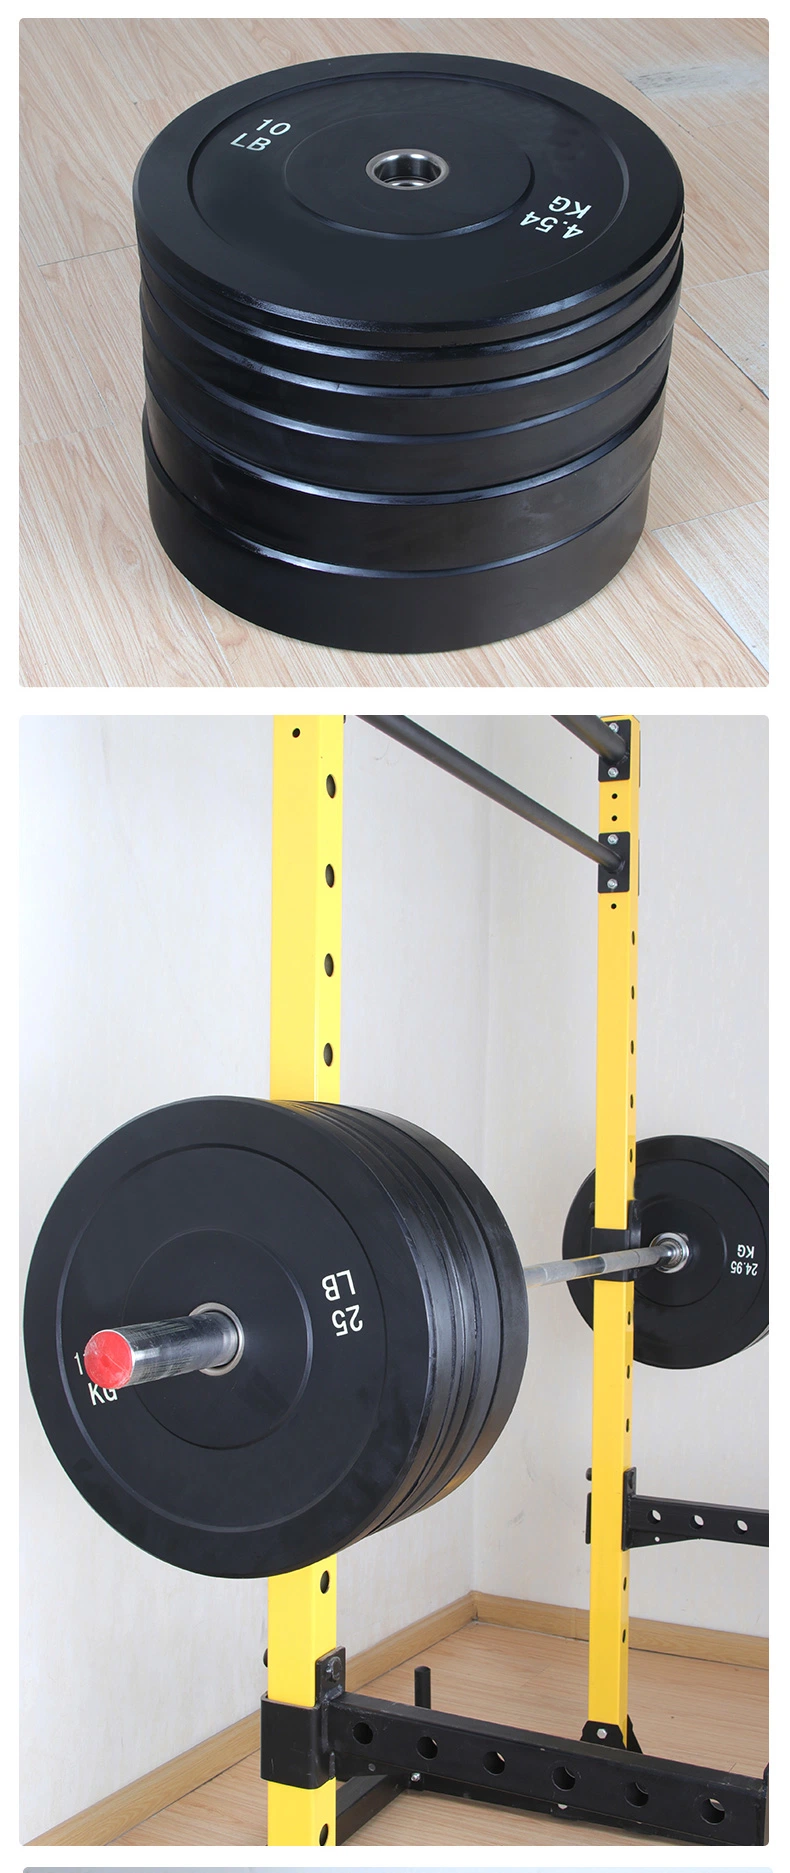 Gym Lifting Equipment Power Training Manufacture Rubber Bumper Weights Set Free Weight Plate with Steel Hub